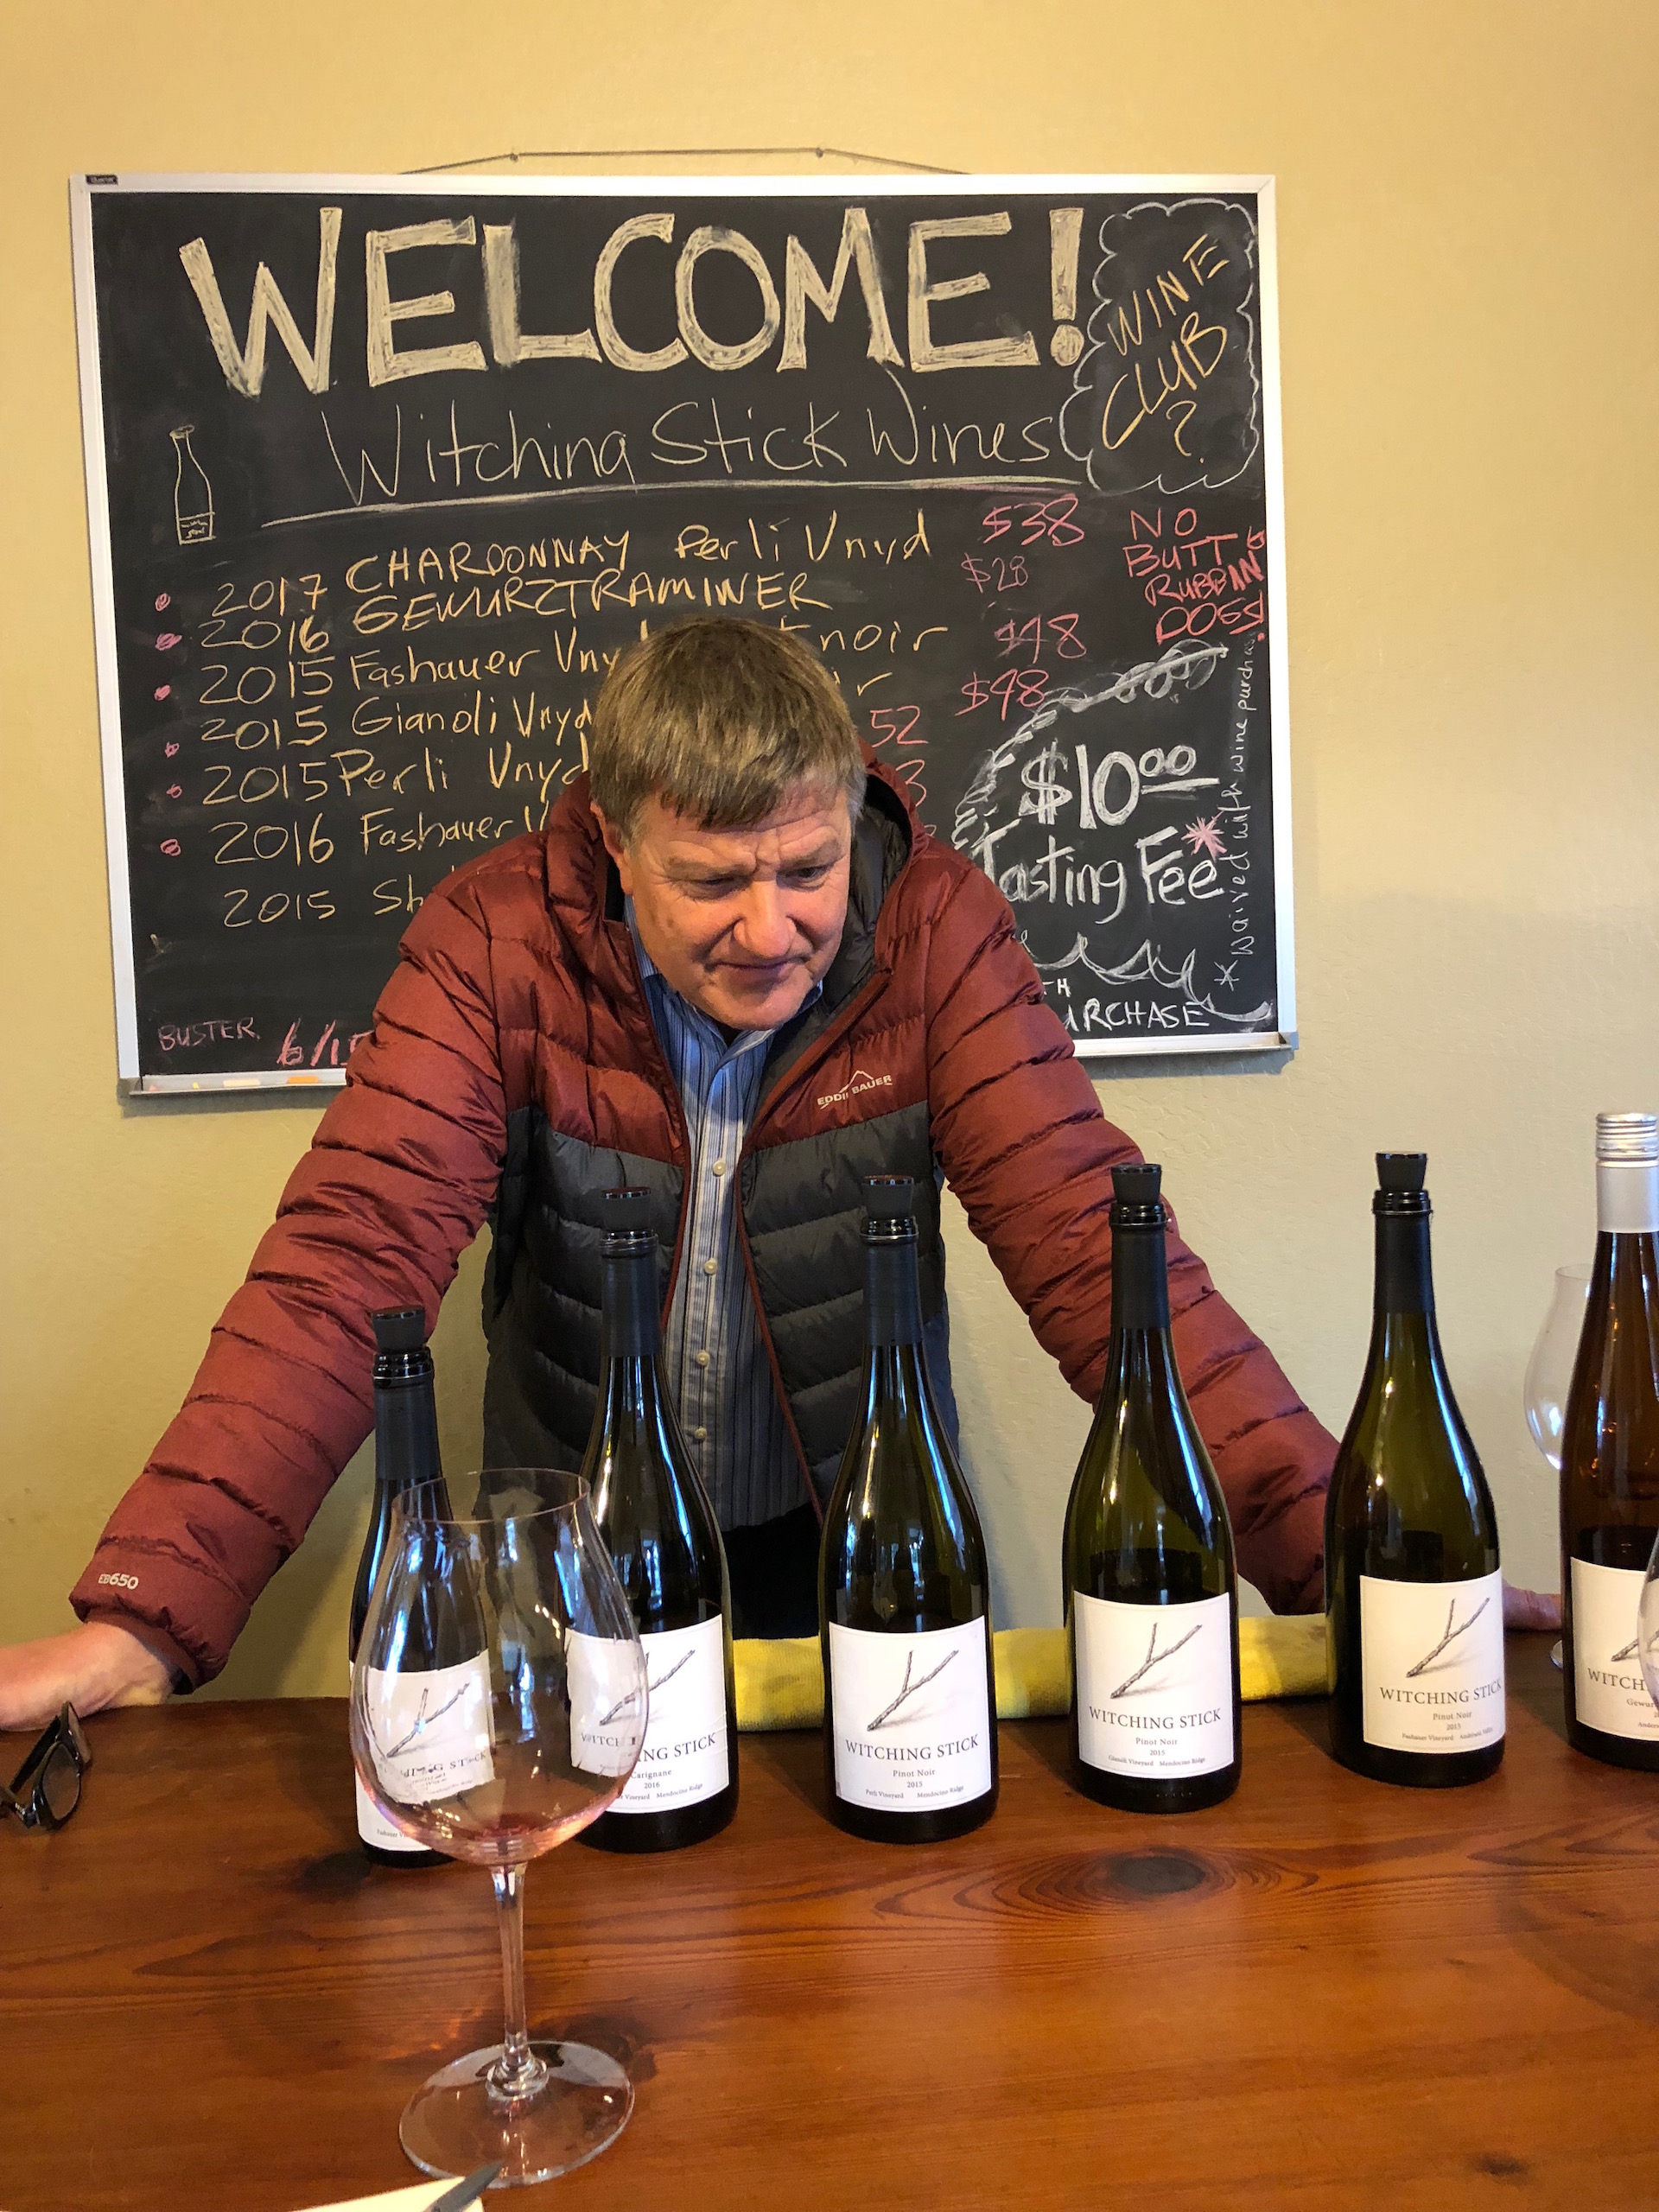 Witching Stick Winery owner Van Williamson presents his wines and offers decades of wine industry knowledge